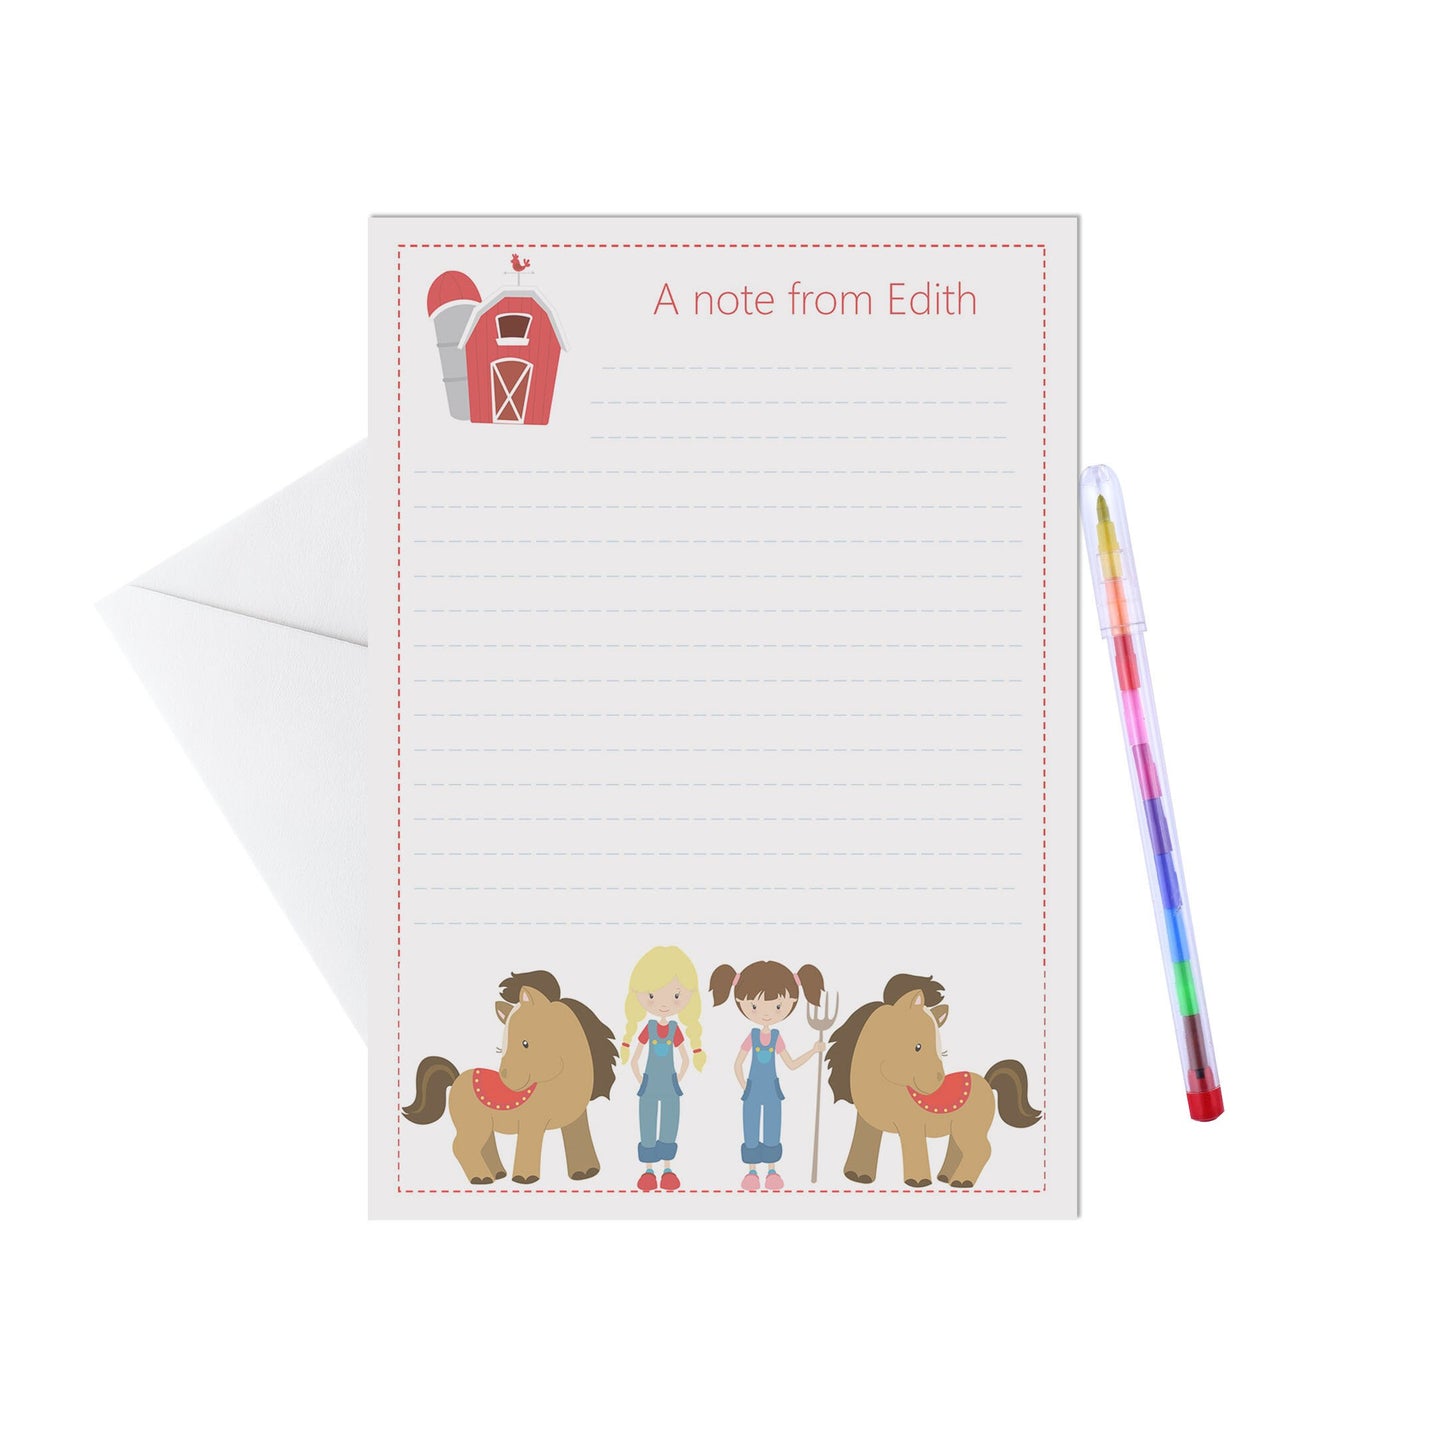 Farm animals Personalised Letter Writing Set - A5 Pack Of 15 Sheets & Envelopes